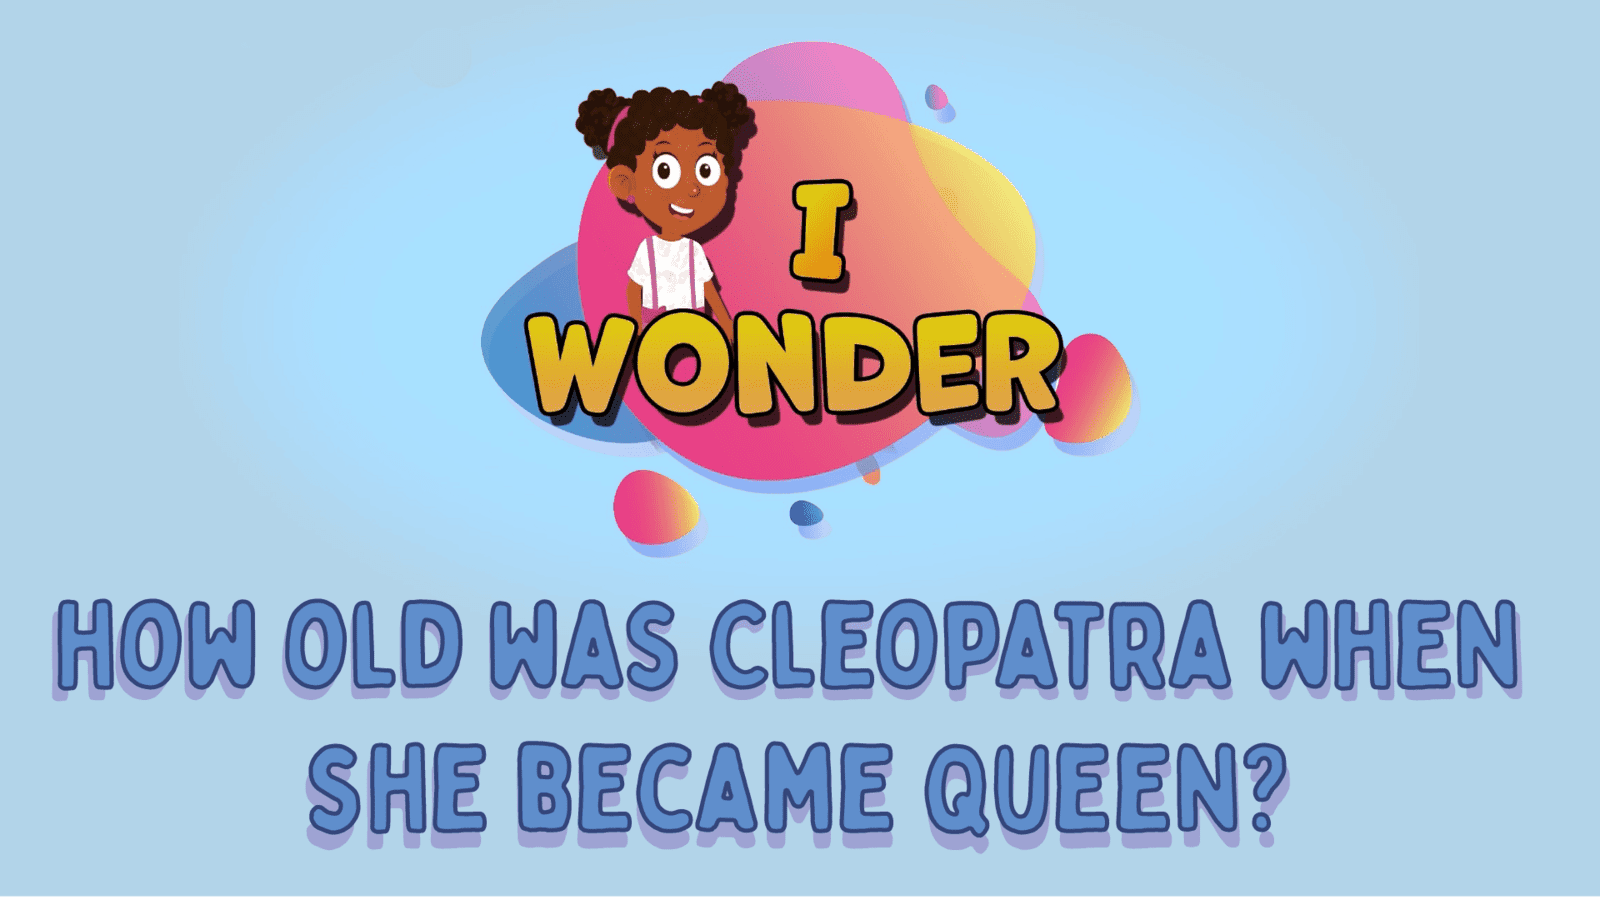 How Old Was Cleopatra When She Became Queen?